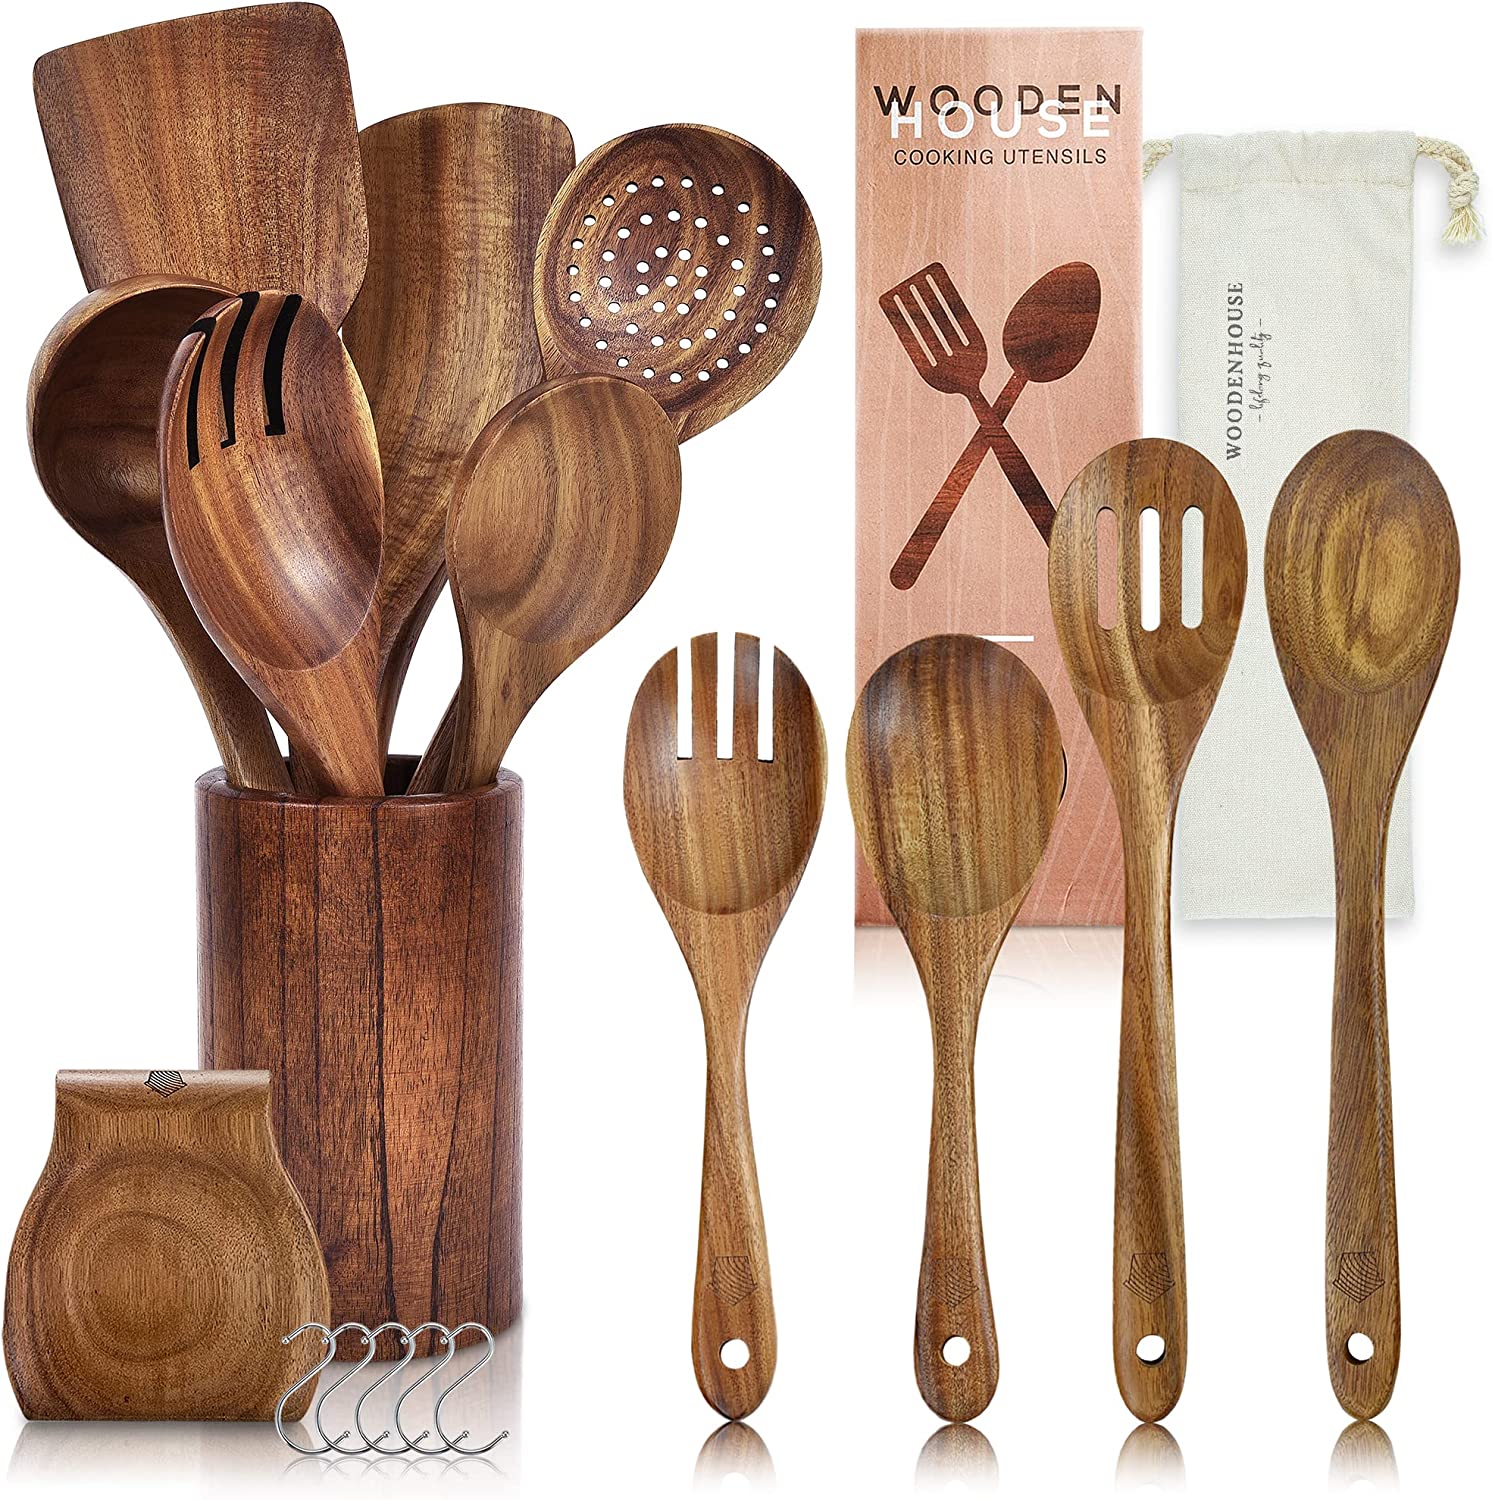 Wooden Cooking Utensils & Wood Spoons Bundle – Kitchen Utensils Set of 13 & Mixing and Serving Spoons, Set of 4